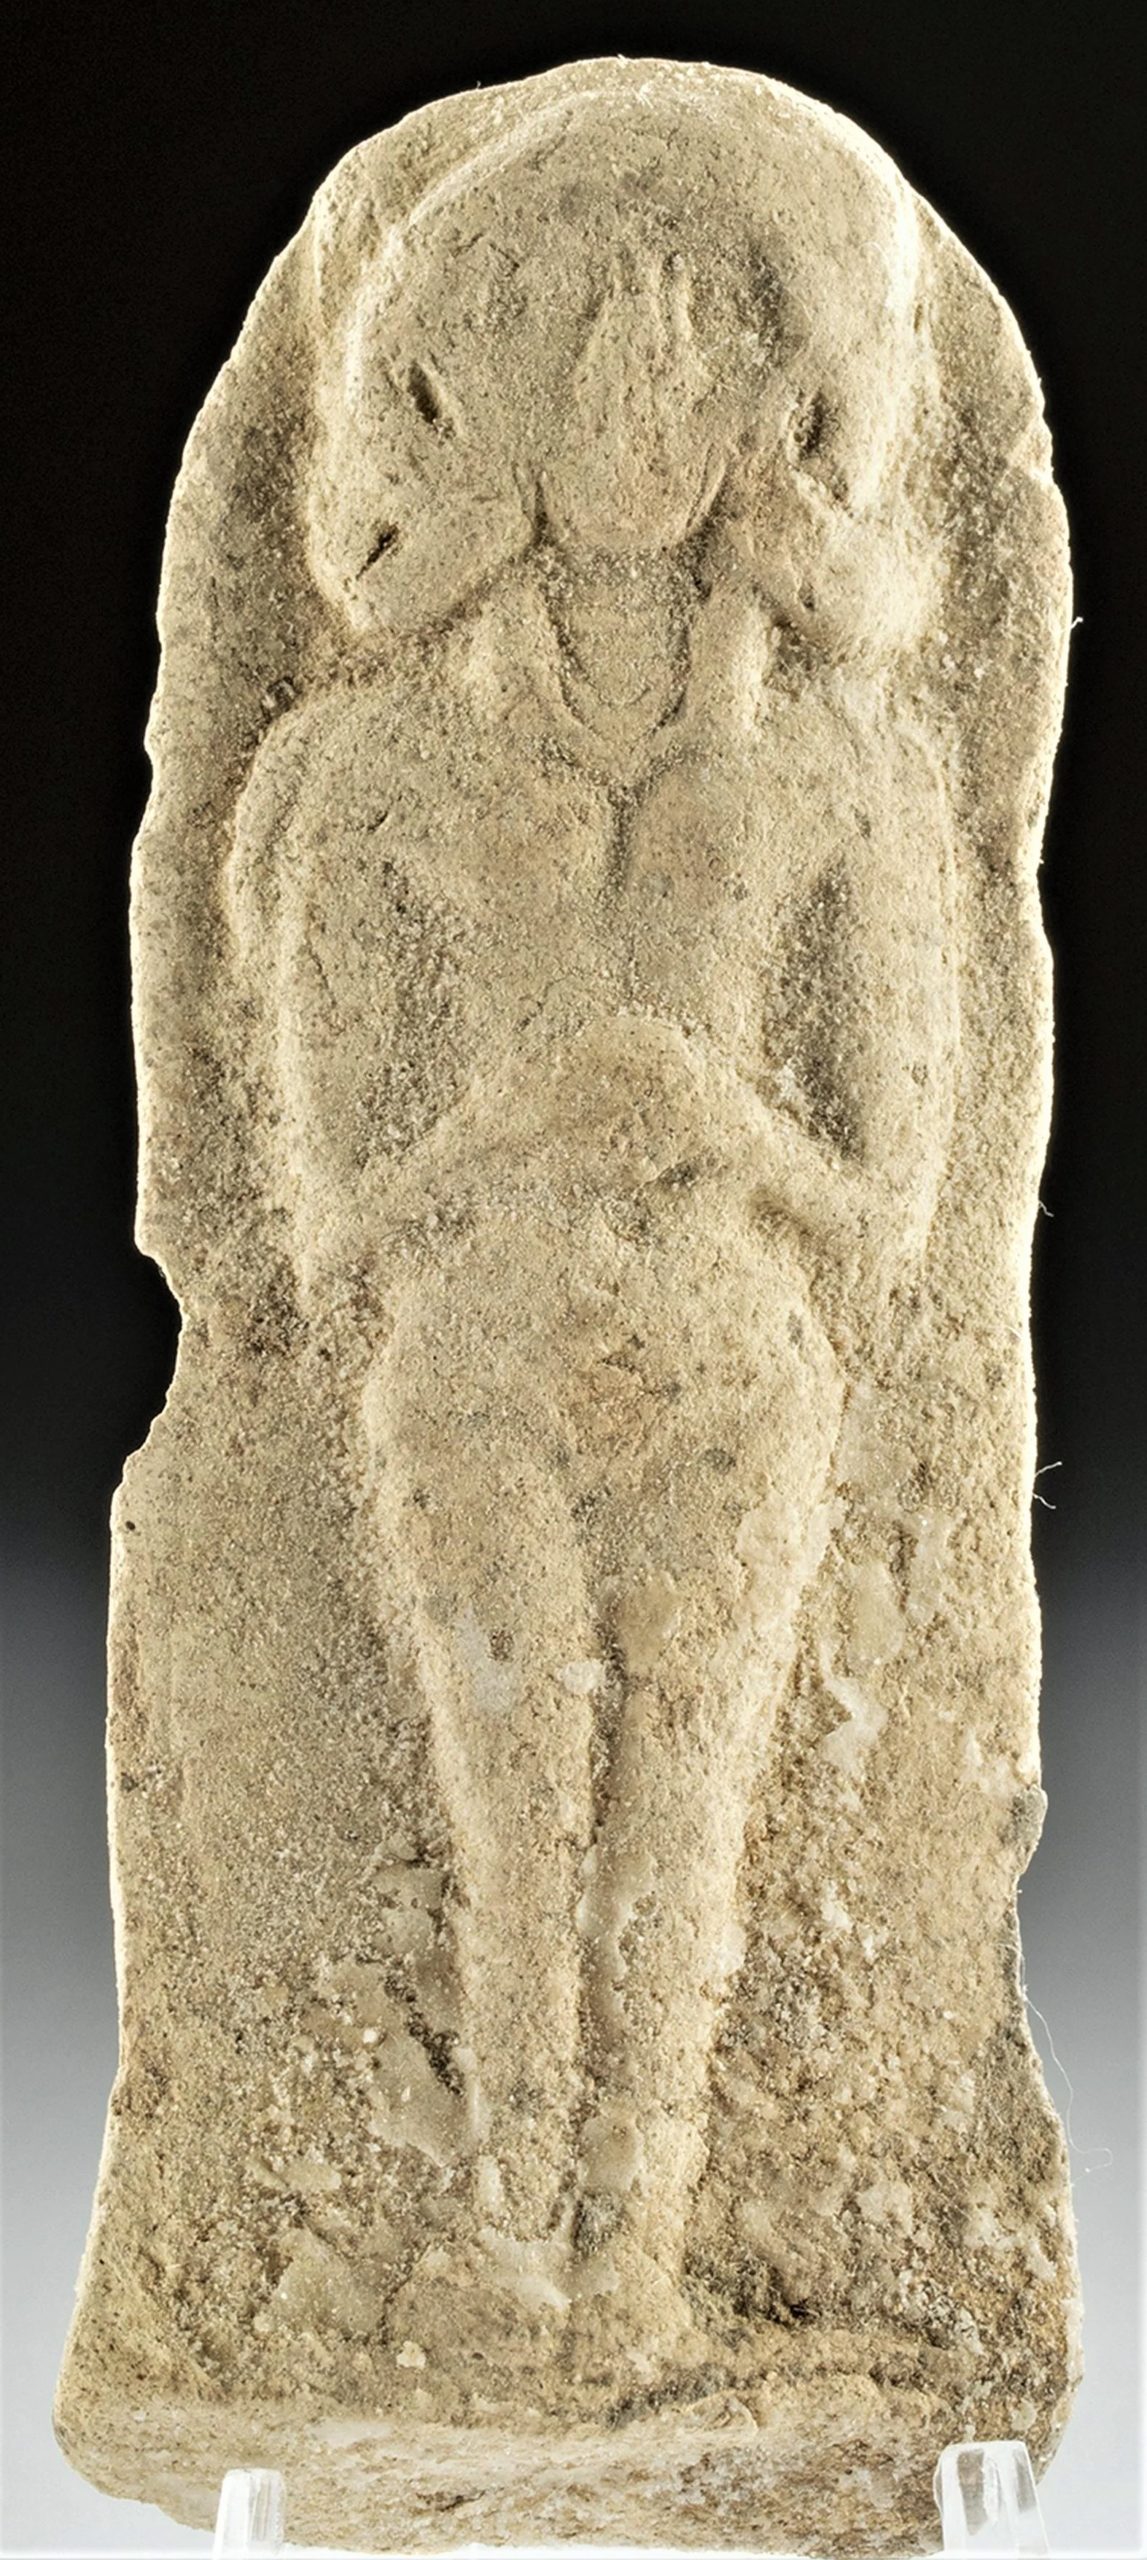 8b - naked Inanna with hair fluffed